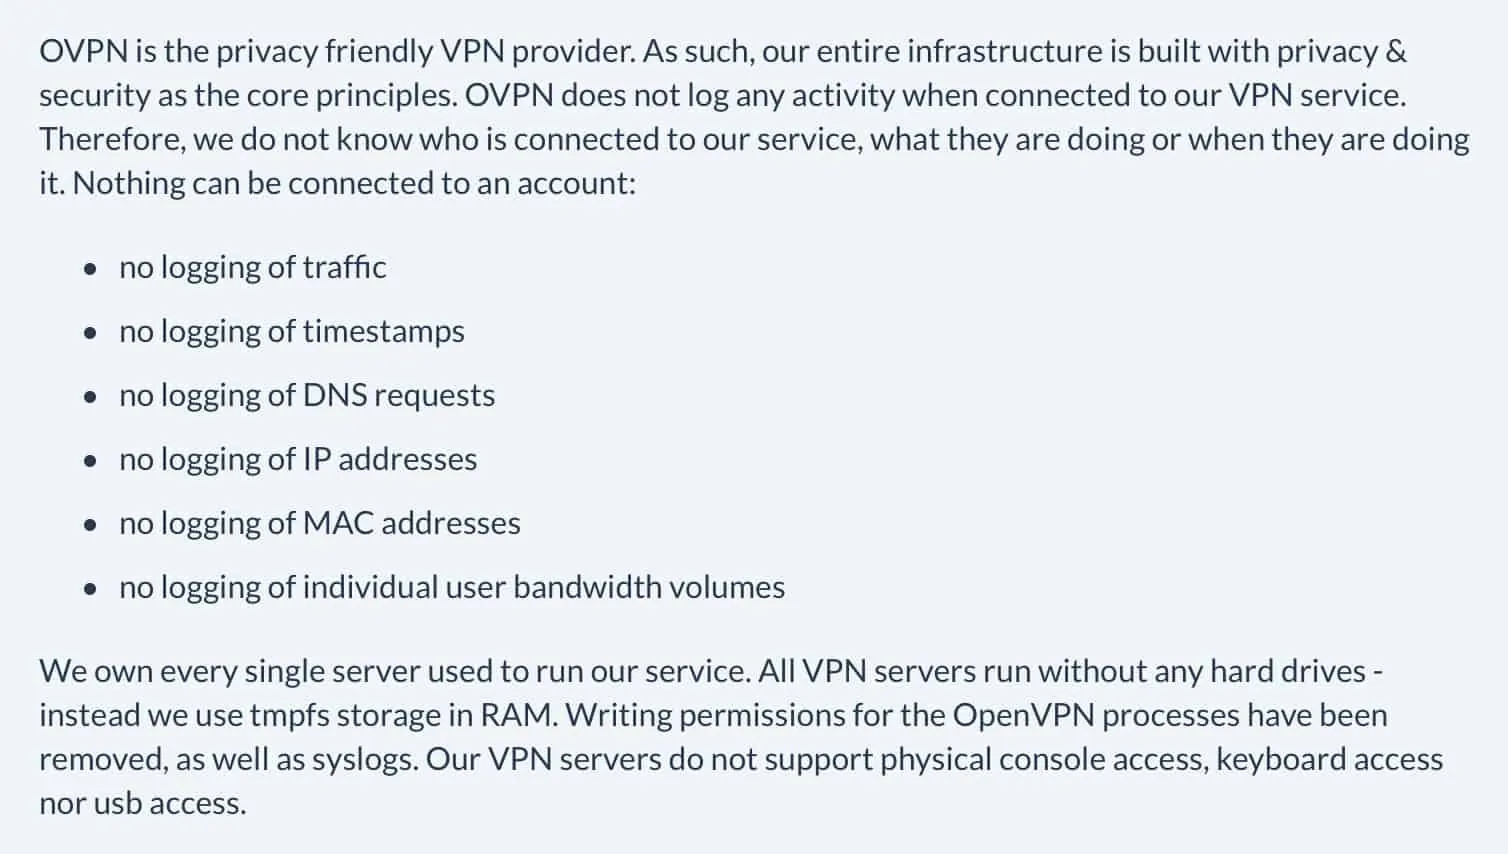 OVPN Privacy Policy